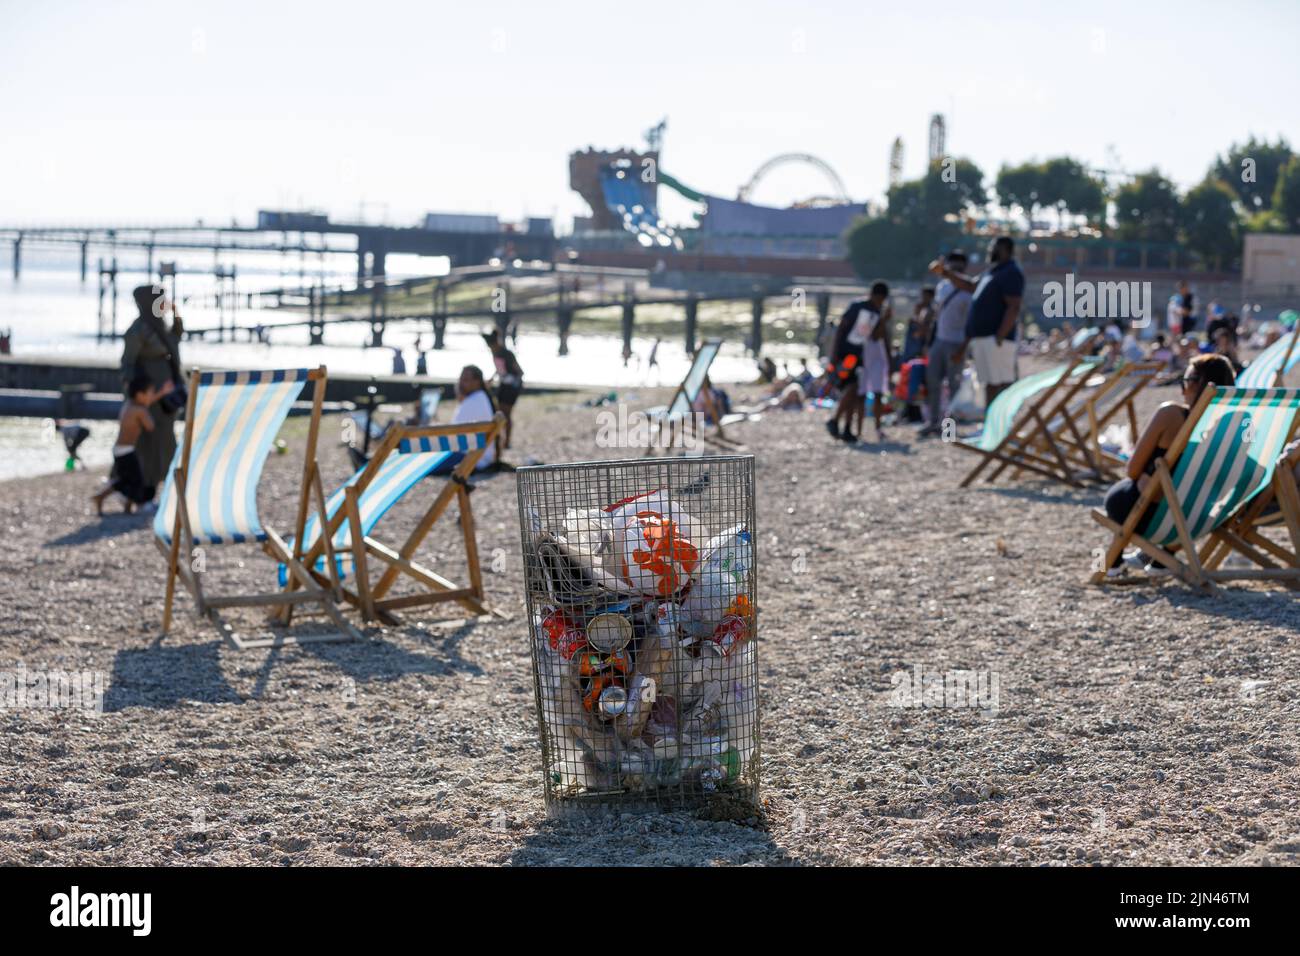 A trash can on a beach with deck chairs and people blurred in the background on a hot sunny day in summer. Rubbish bin. Stock Photo